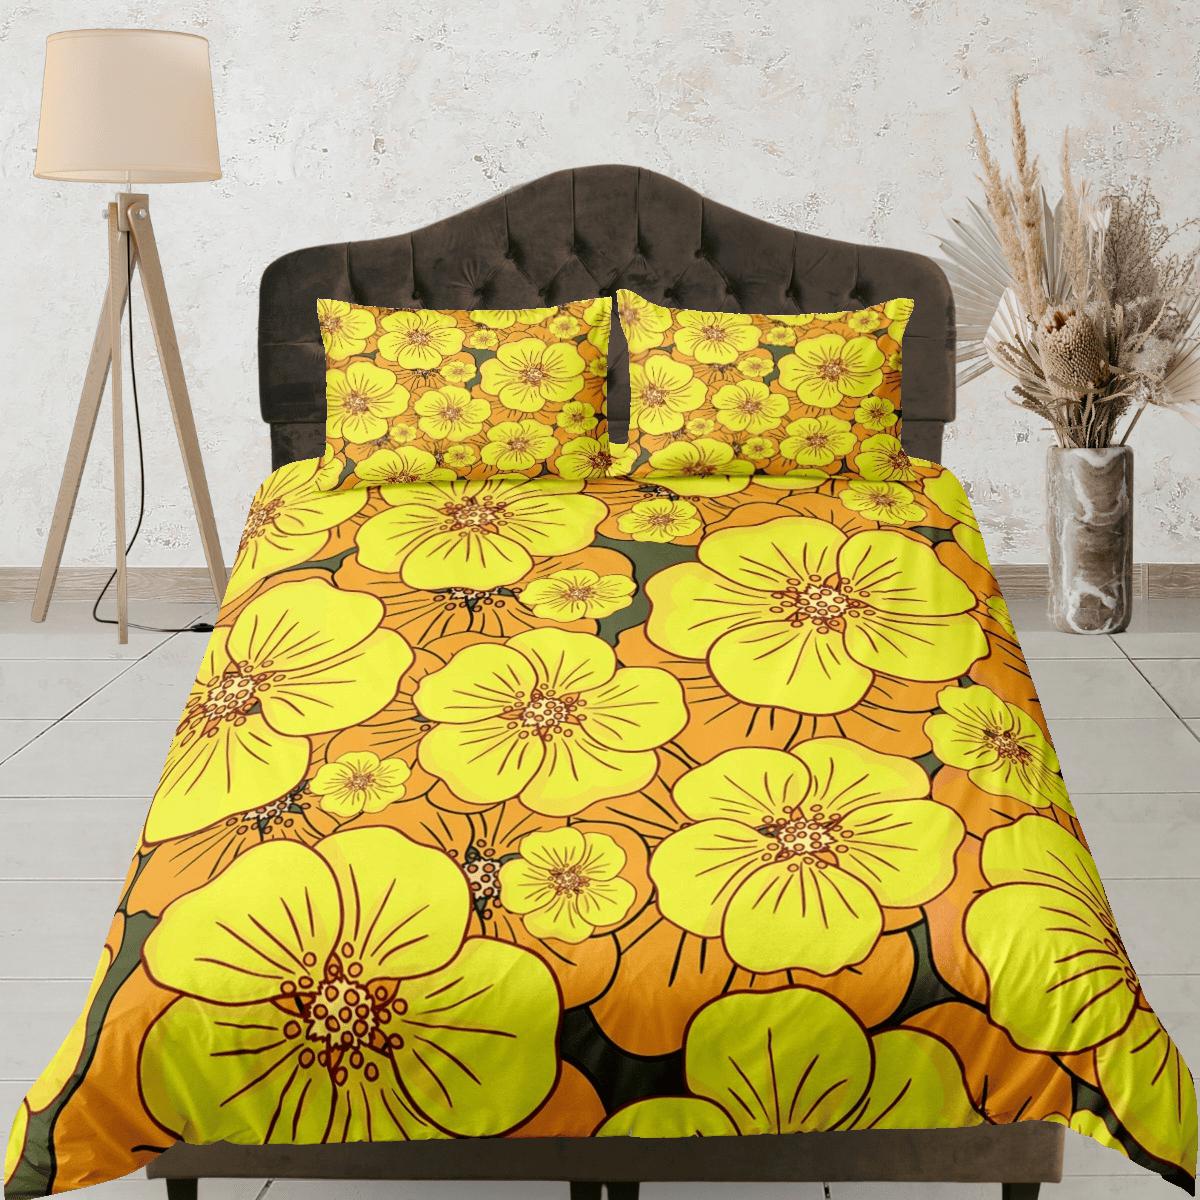 daintyduvet Mid century modern bedding yellow floral duvet cover colorful retro bedding, vintage style boho chic decor bedspread shabby chic bedding